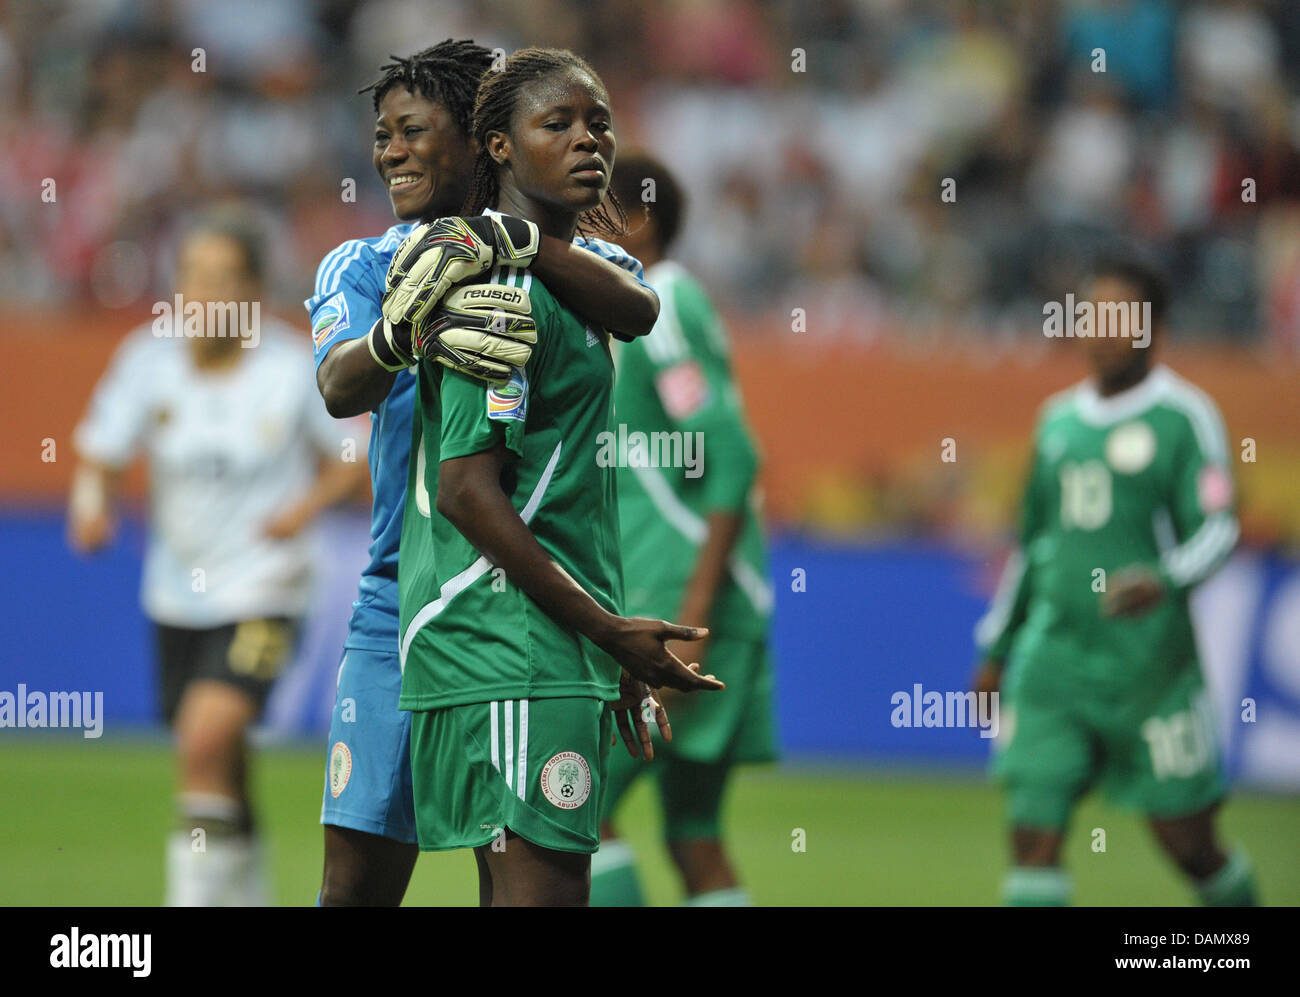 Nigeria's goalkeeper Precious Dede (L) and Onome Ebi hug during the Group A match Germany against Nigeria of FIFA Women's World Cup soccer tournament at the FIFA Women's World Cup Stadium in Frankfurt, Germany, 30 June 2011. Germany won the match with 1-0. Foto: Carmen Jaspersen dpa/lhe Stock Photo